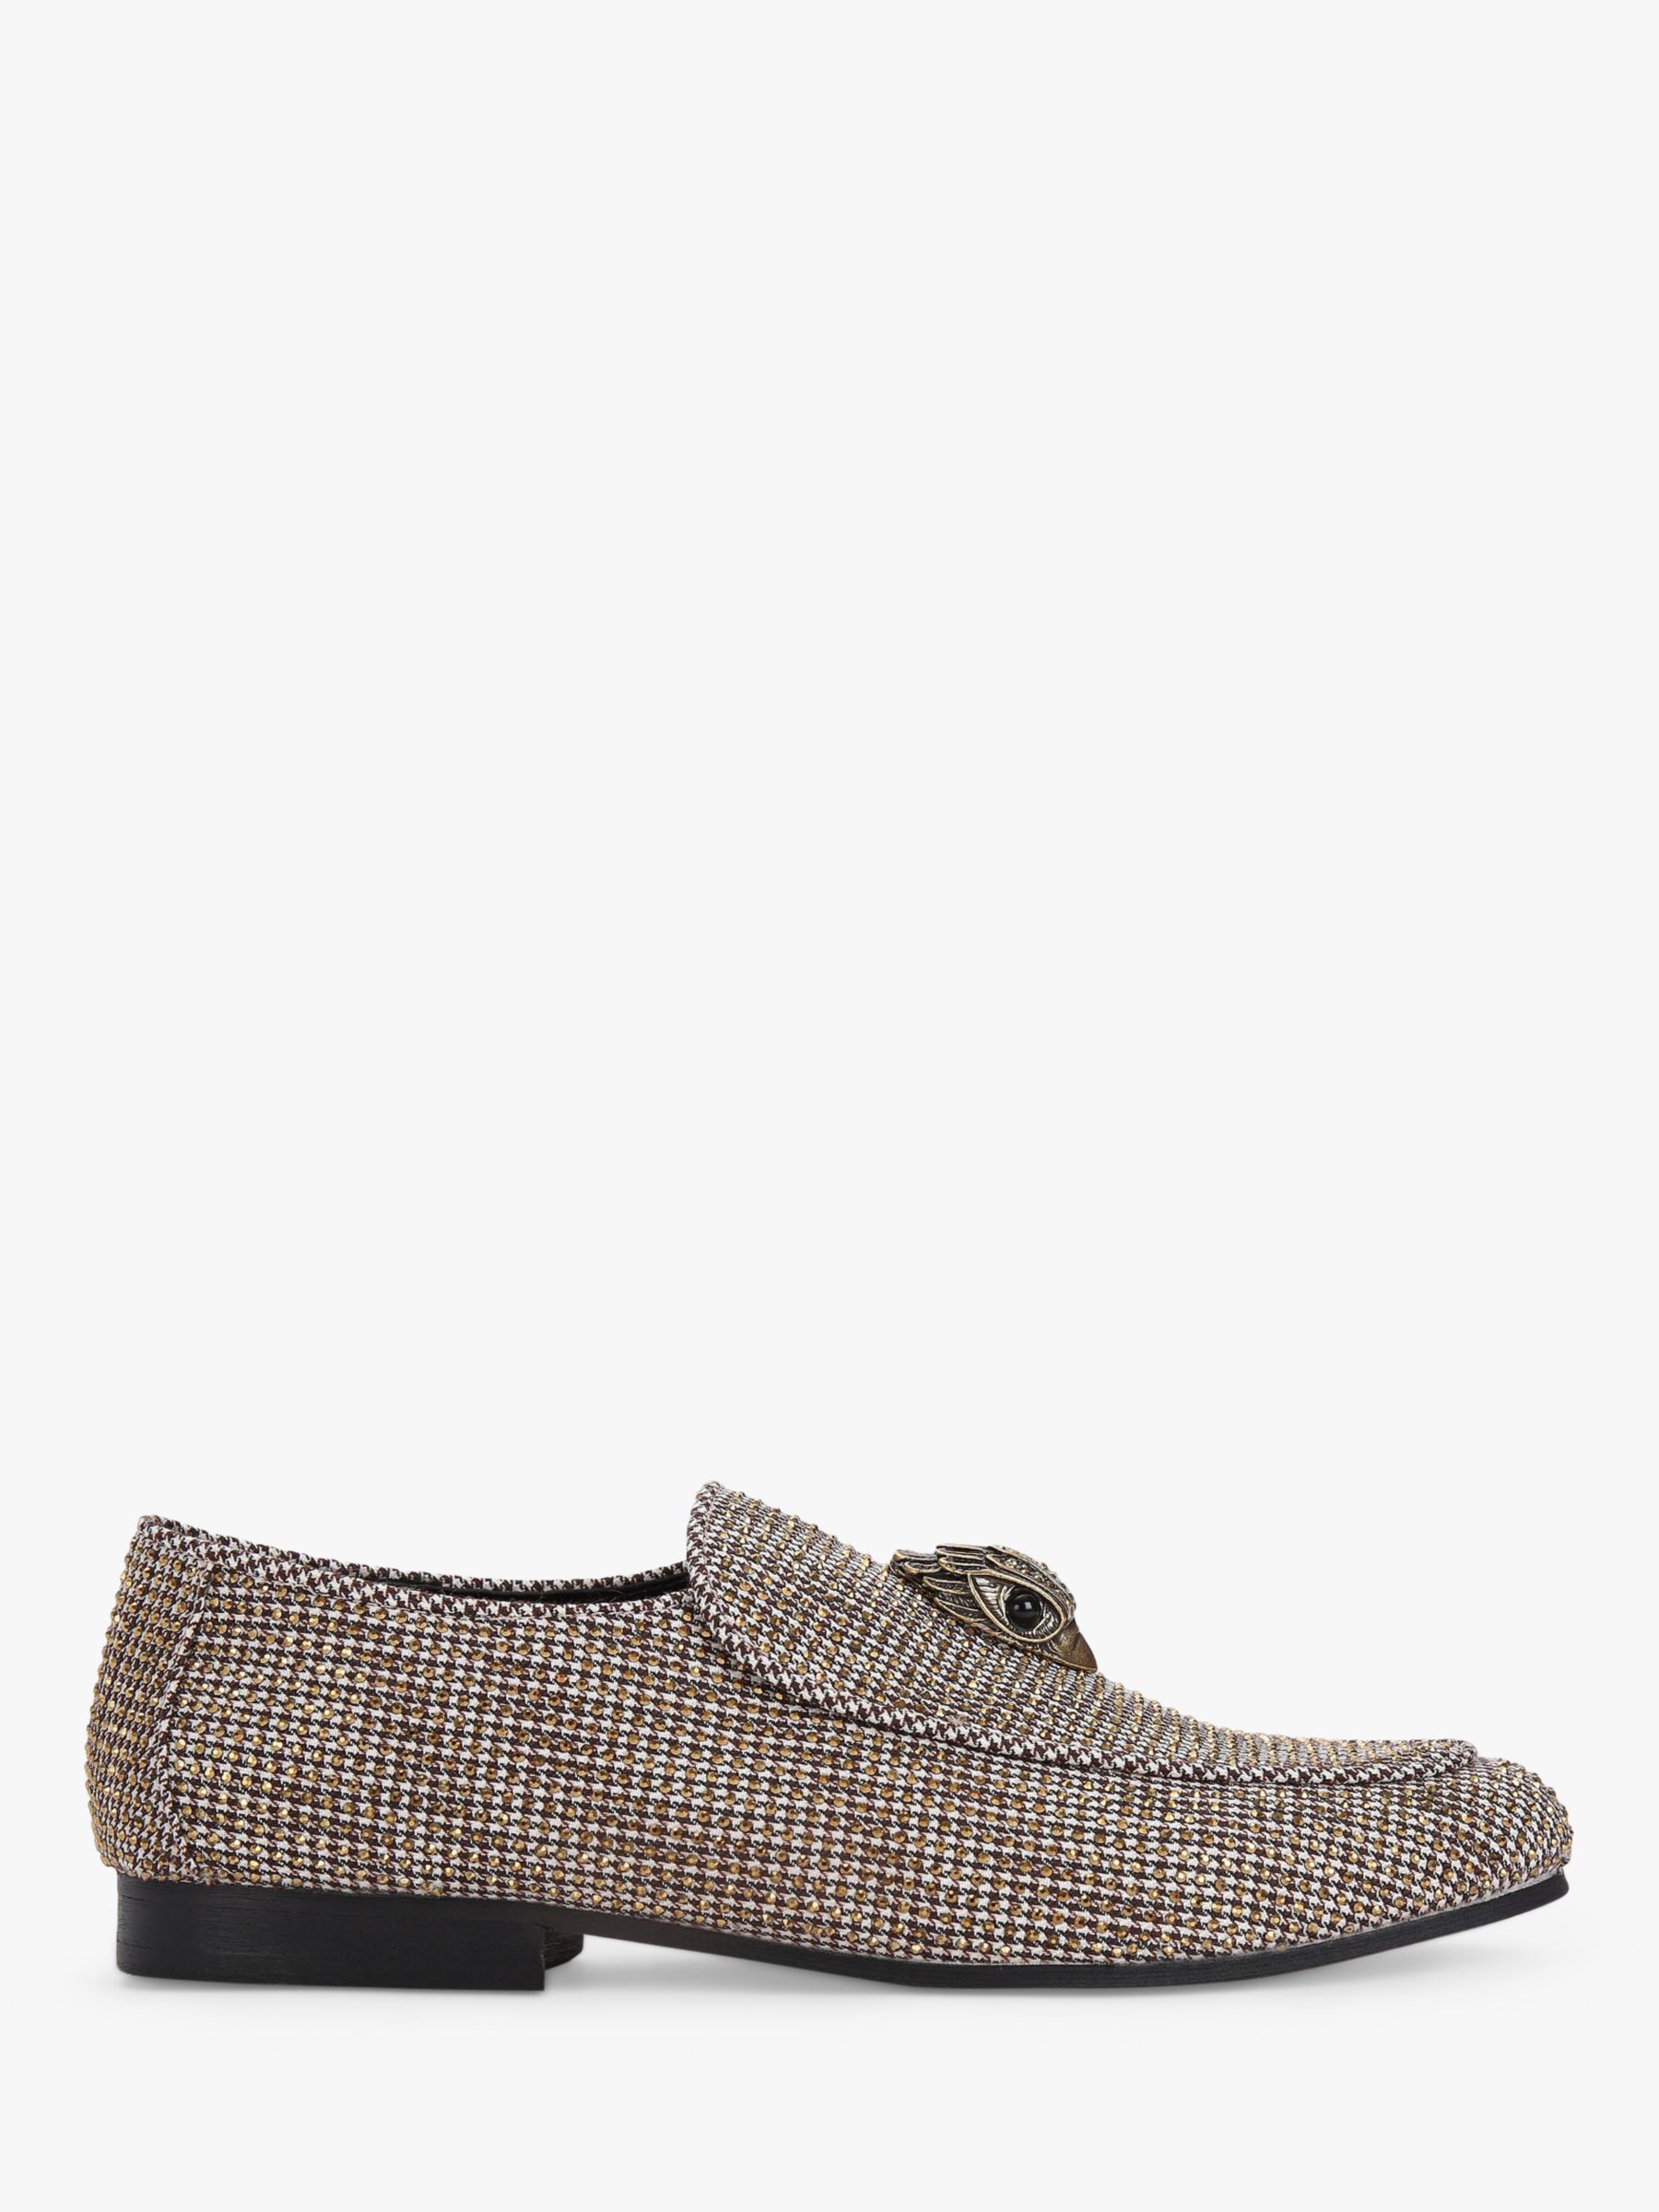 Kurt Geiger London Holly Eagle Fabric Loafers, Beige at John Lewis ...